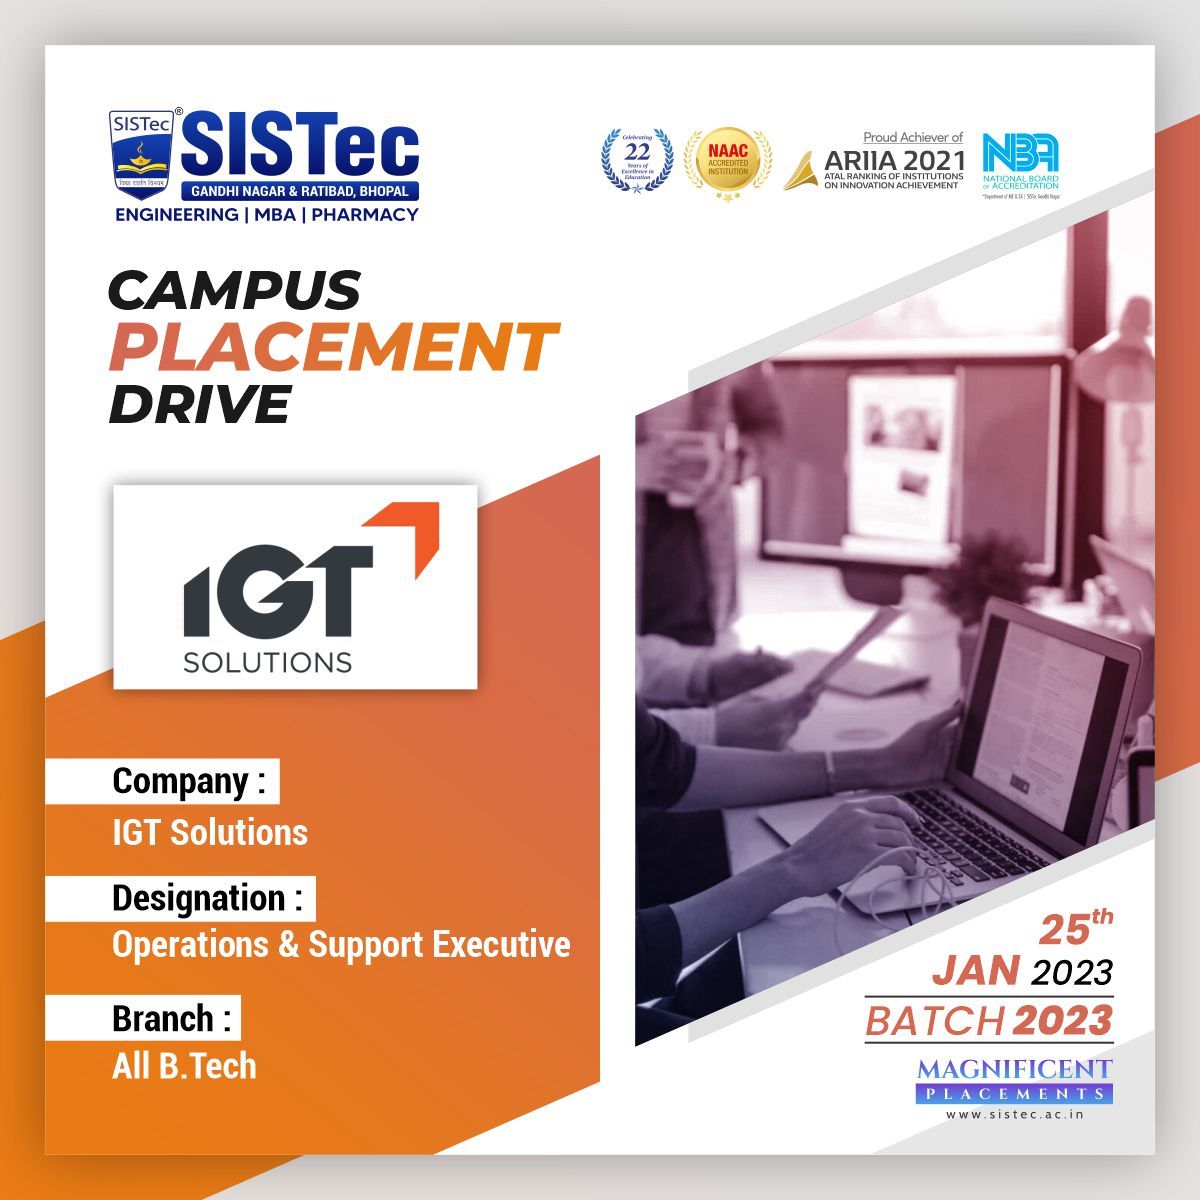 Campus #PlacementDrive Alert🎯🚨

Company: #IGTSolutions 
Date: 25th January 2023
Branch: All #BTech  (Batch 2023)
Designation: #Operations & #SupportExecutive